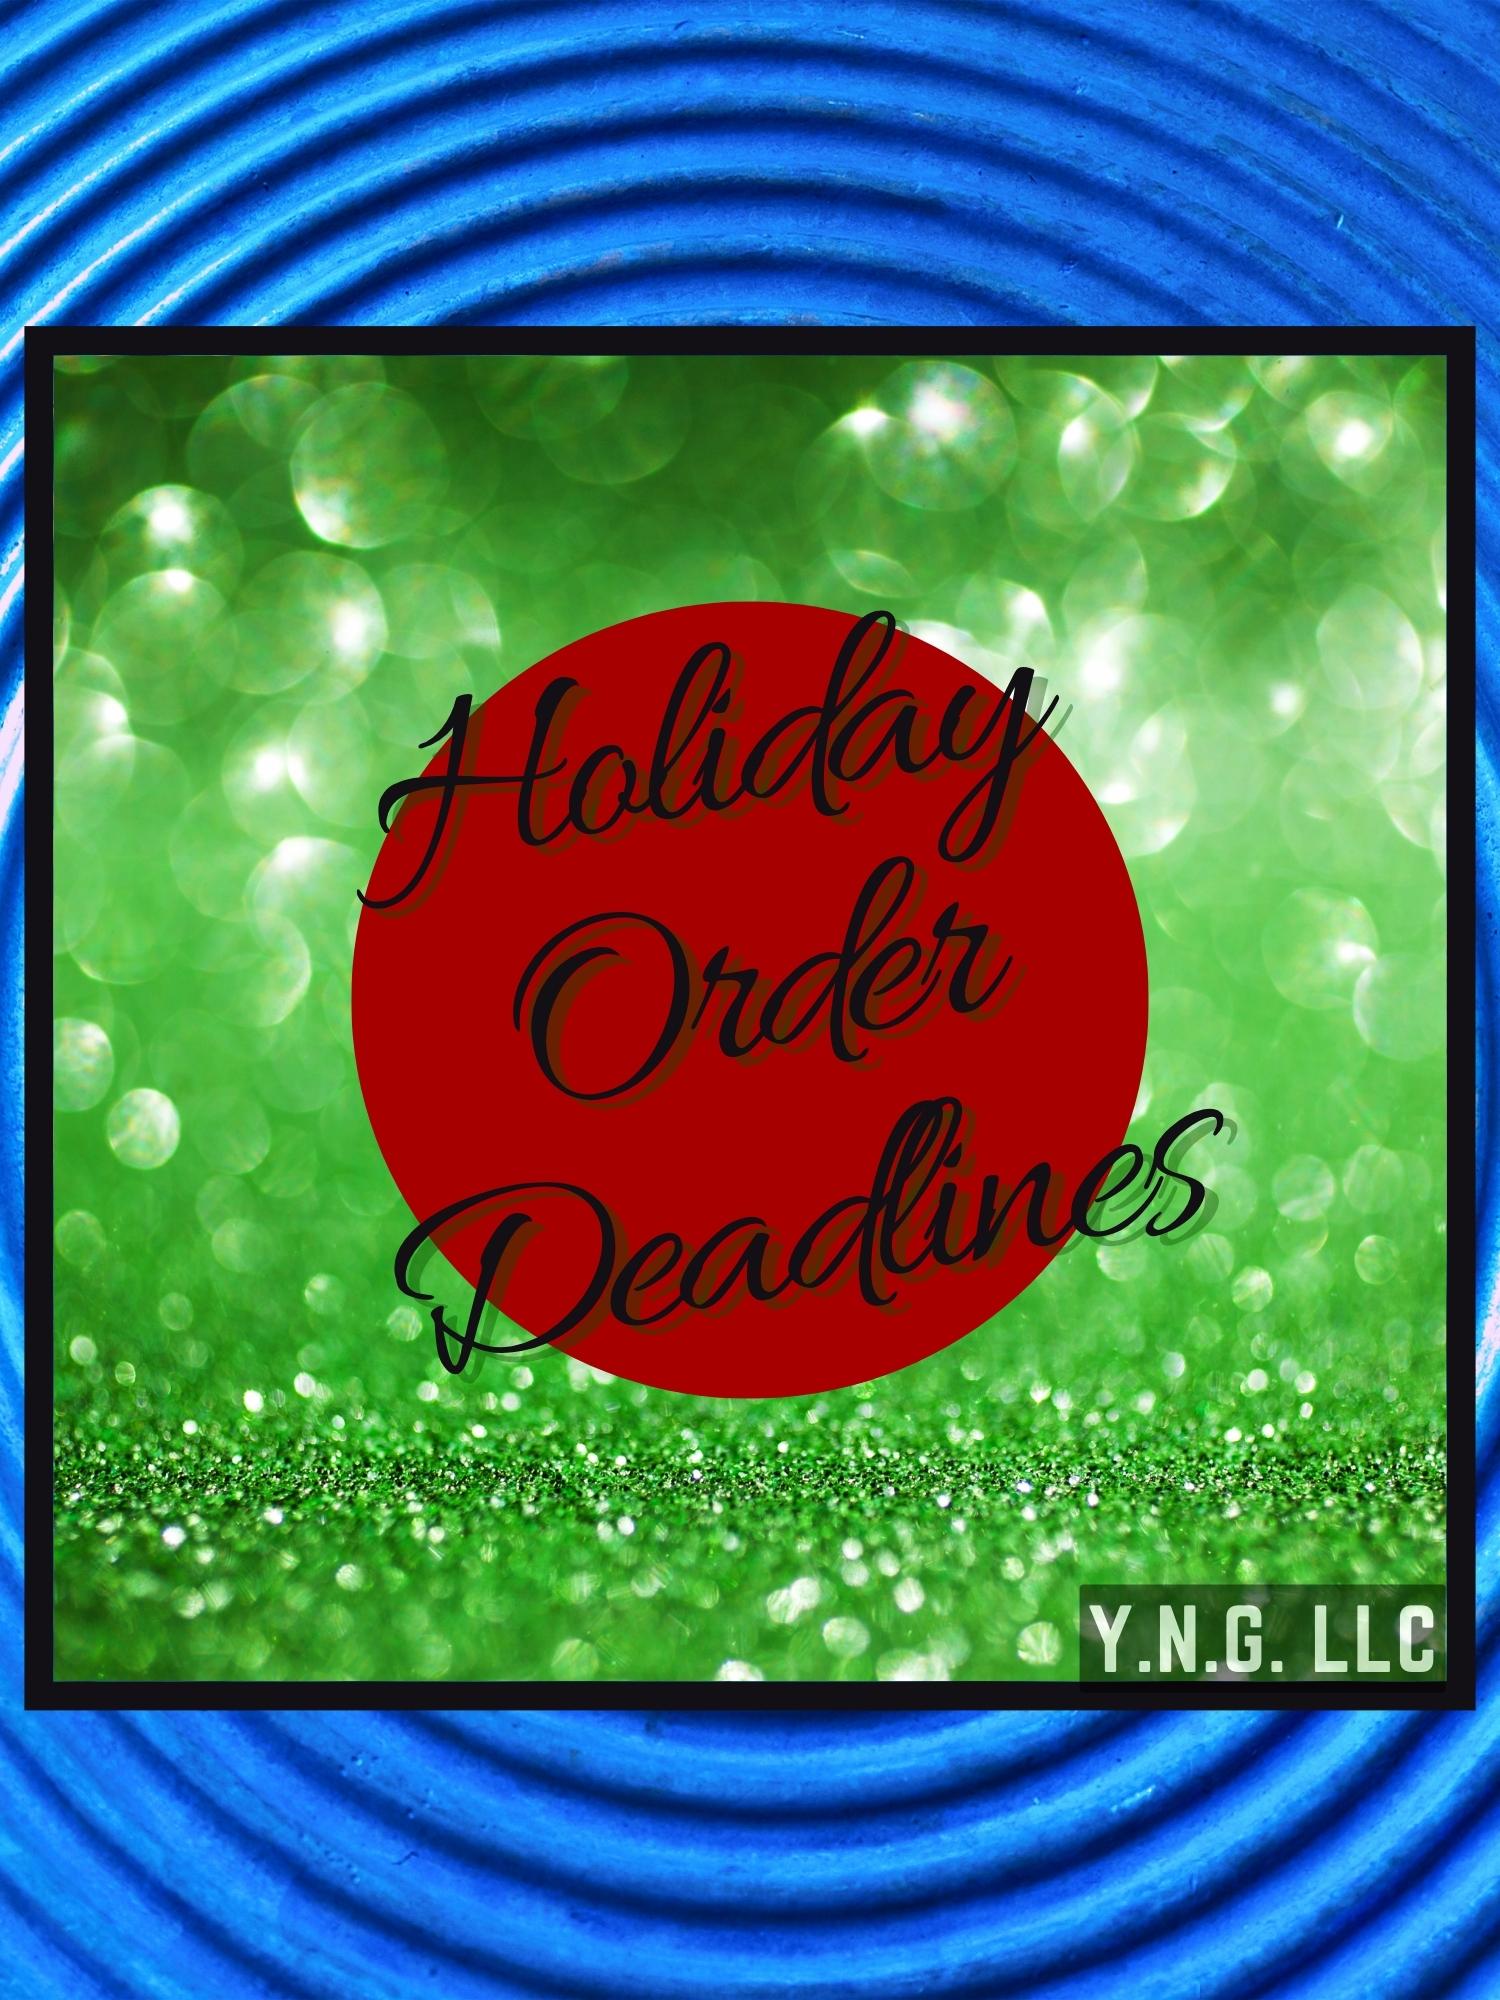 Holiday Order Deadlines written on red circle over green glitter background